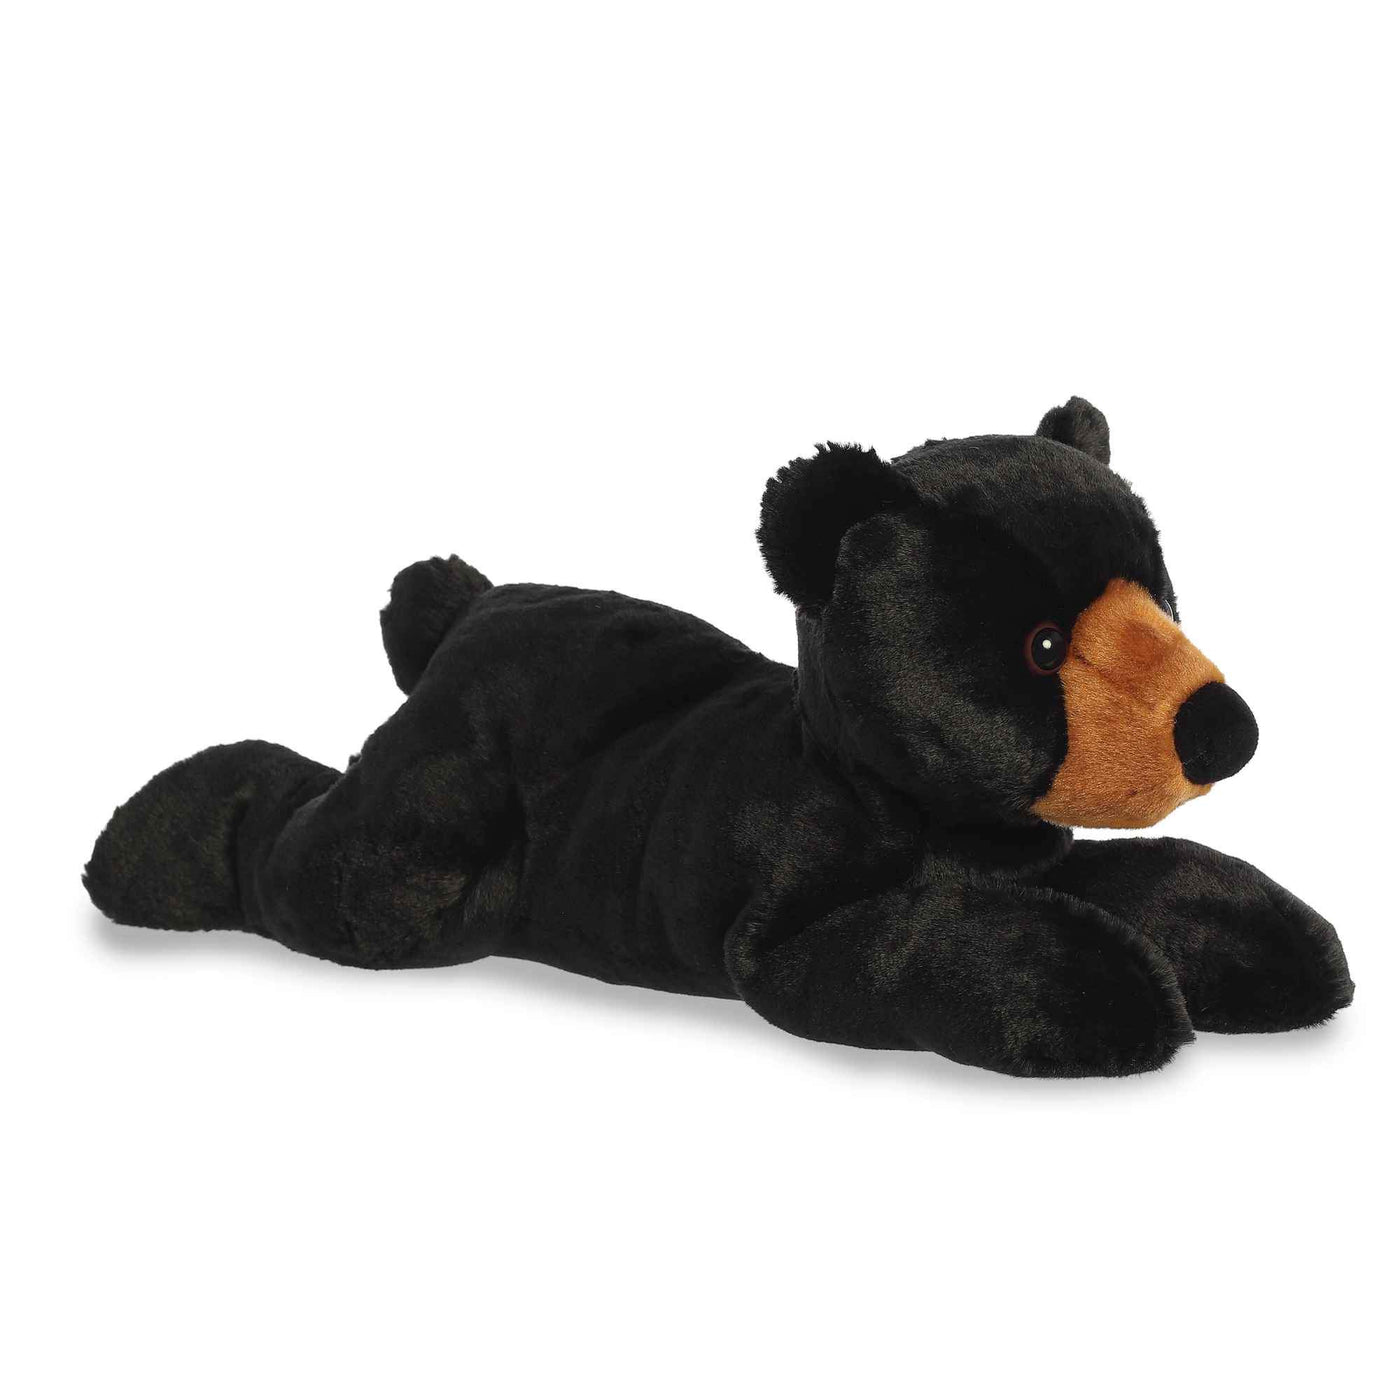 Aurora Grand Flopsy 16.5" Toy-HOME/GIFTWARE-BLACKSTONE BEAR-Kevin's Fine Outdoor Gear & Apparel